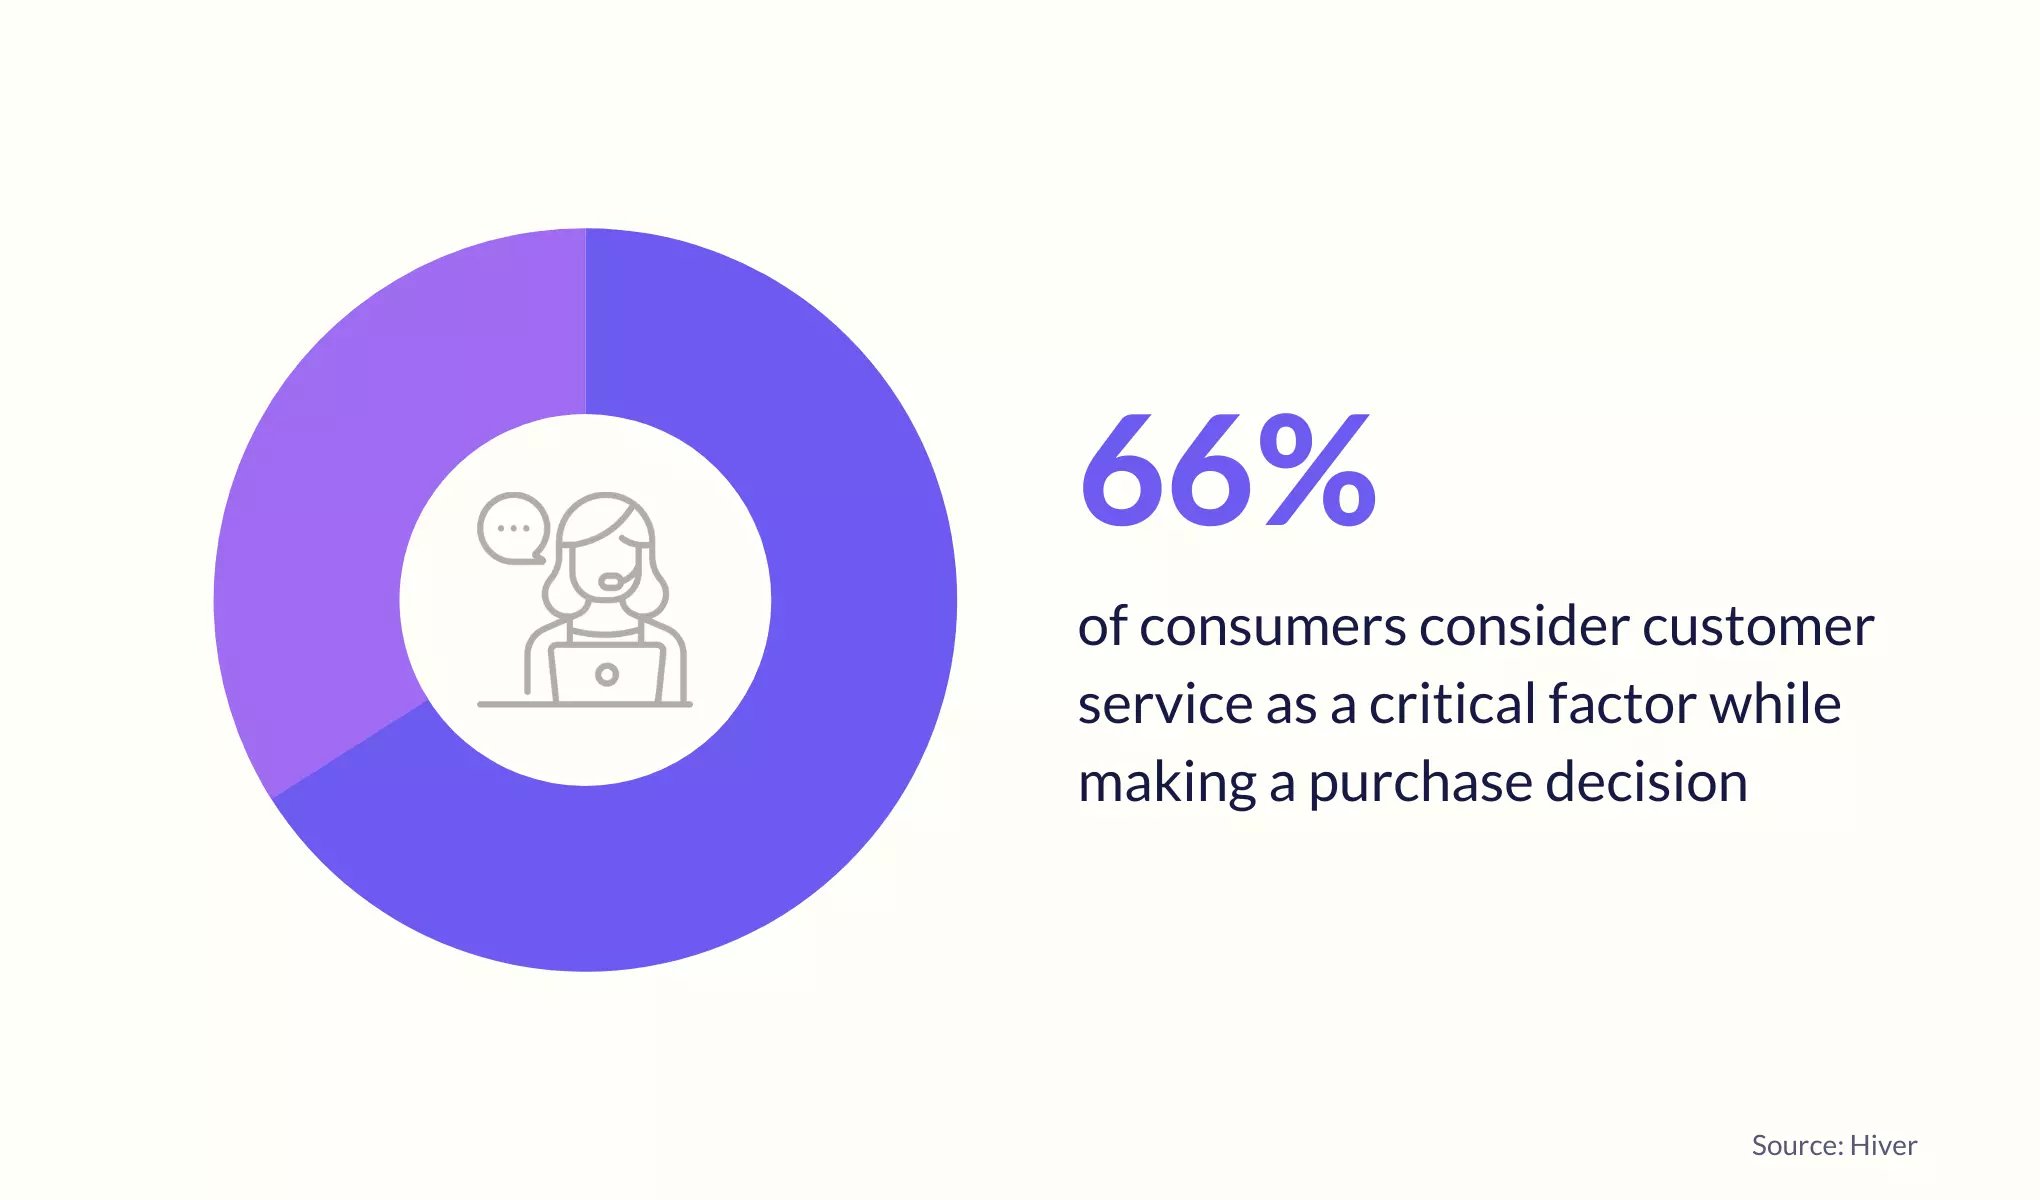 Importance of customer support in a purchase decision 